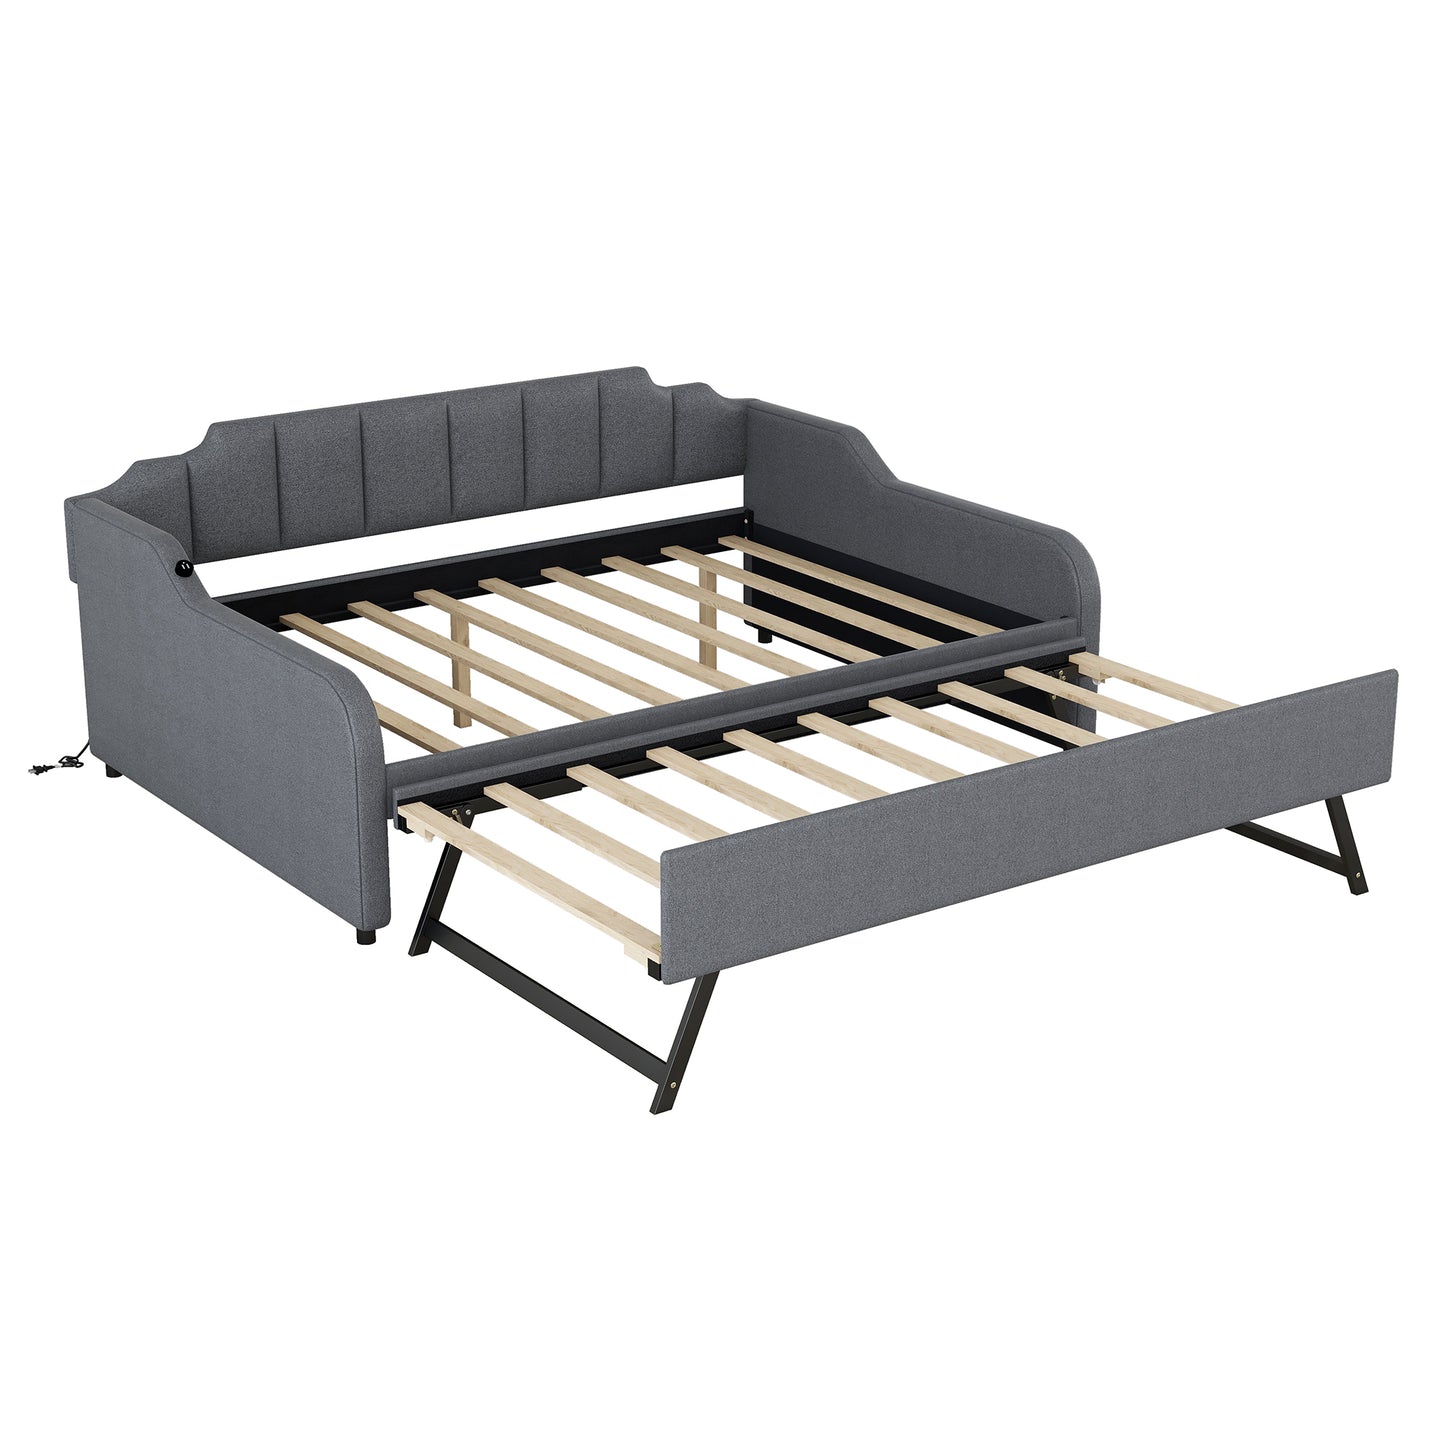 Full Size Upholstery Daybed with Trundle and USB Charging Design,Trundle can be flat or erected,Gray